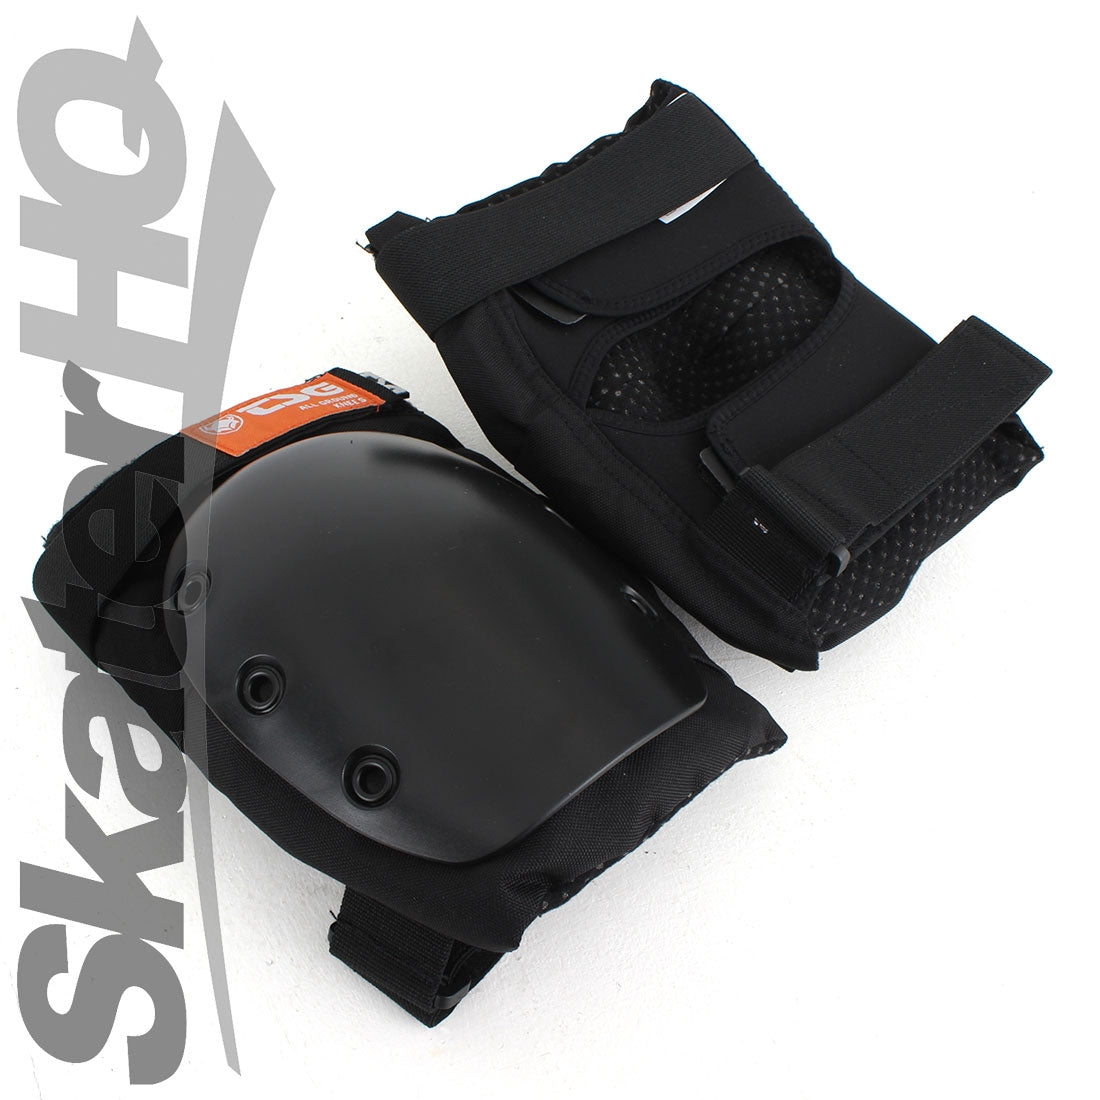 TSG All Ground Kneepads - Small Protective Gear